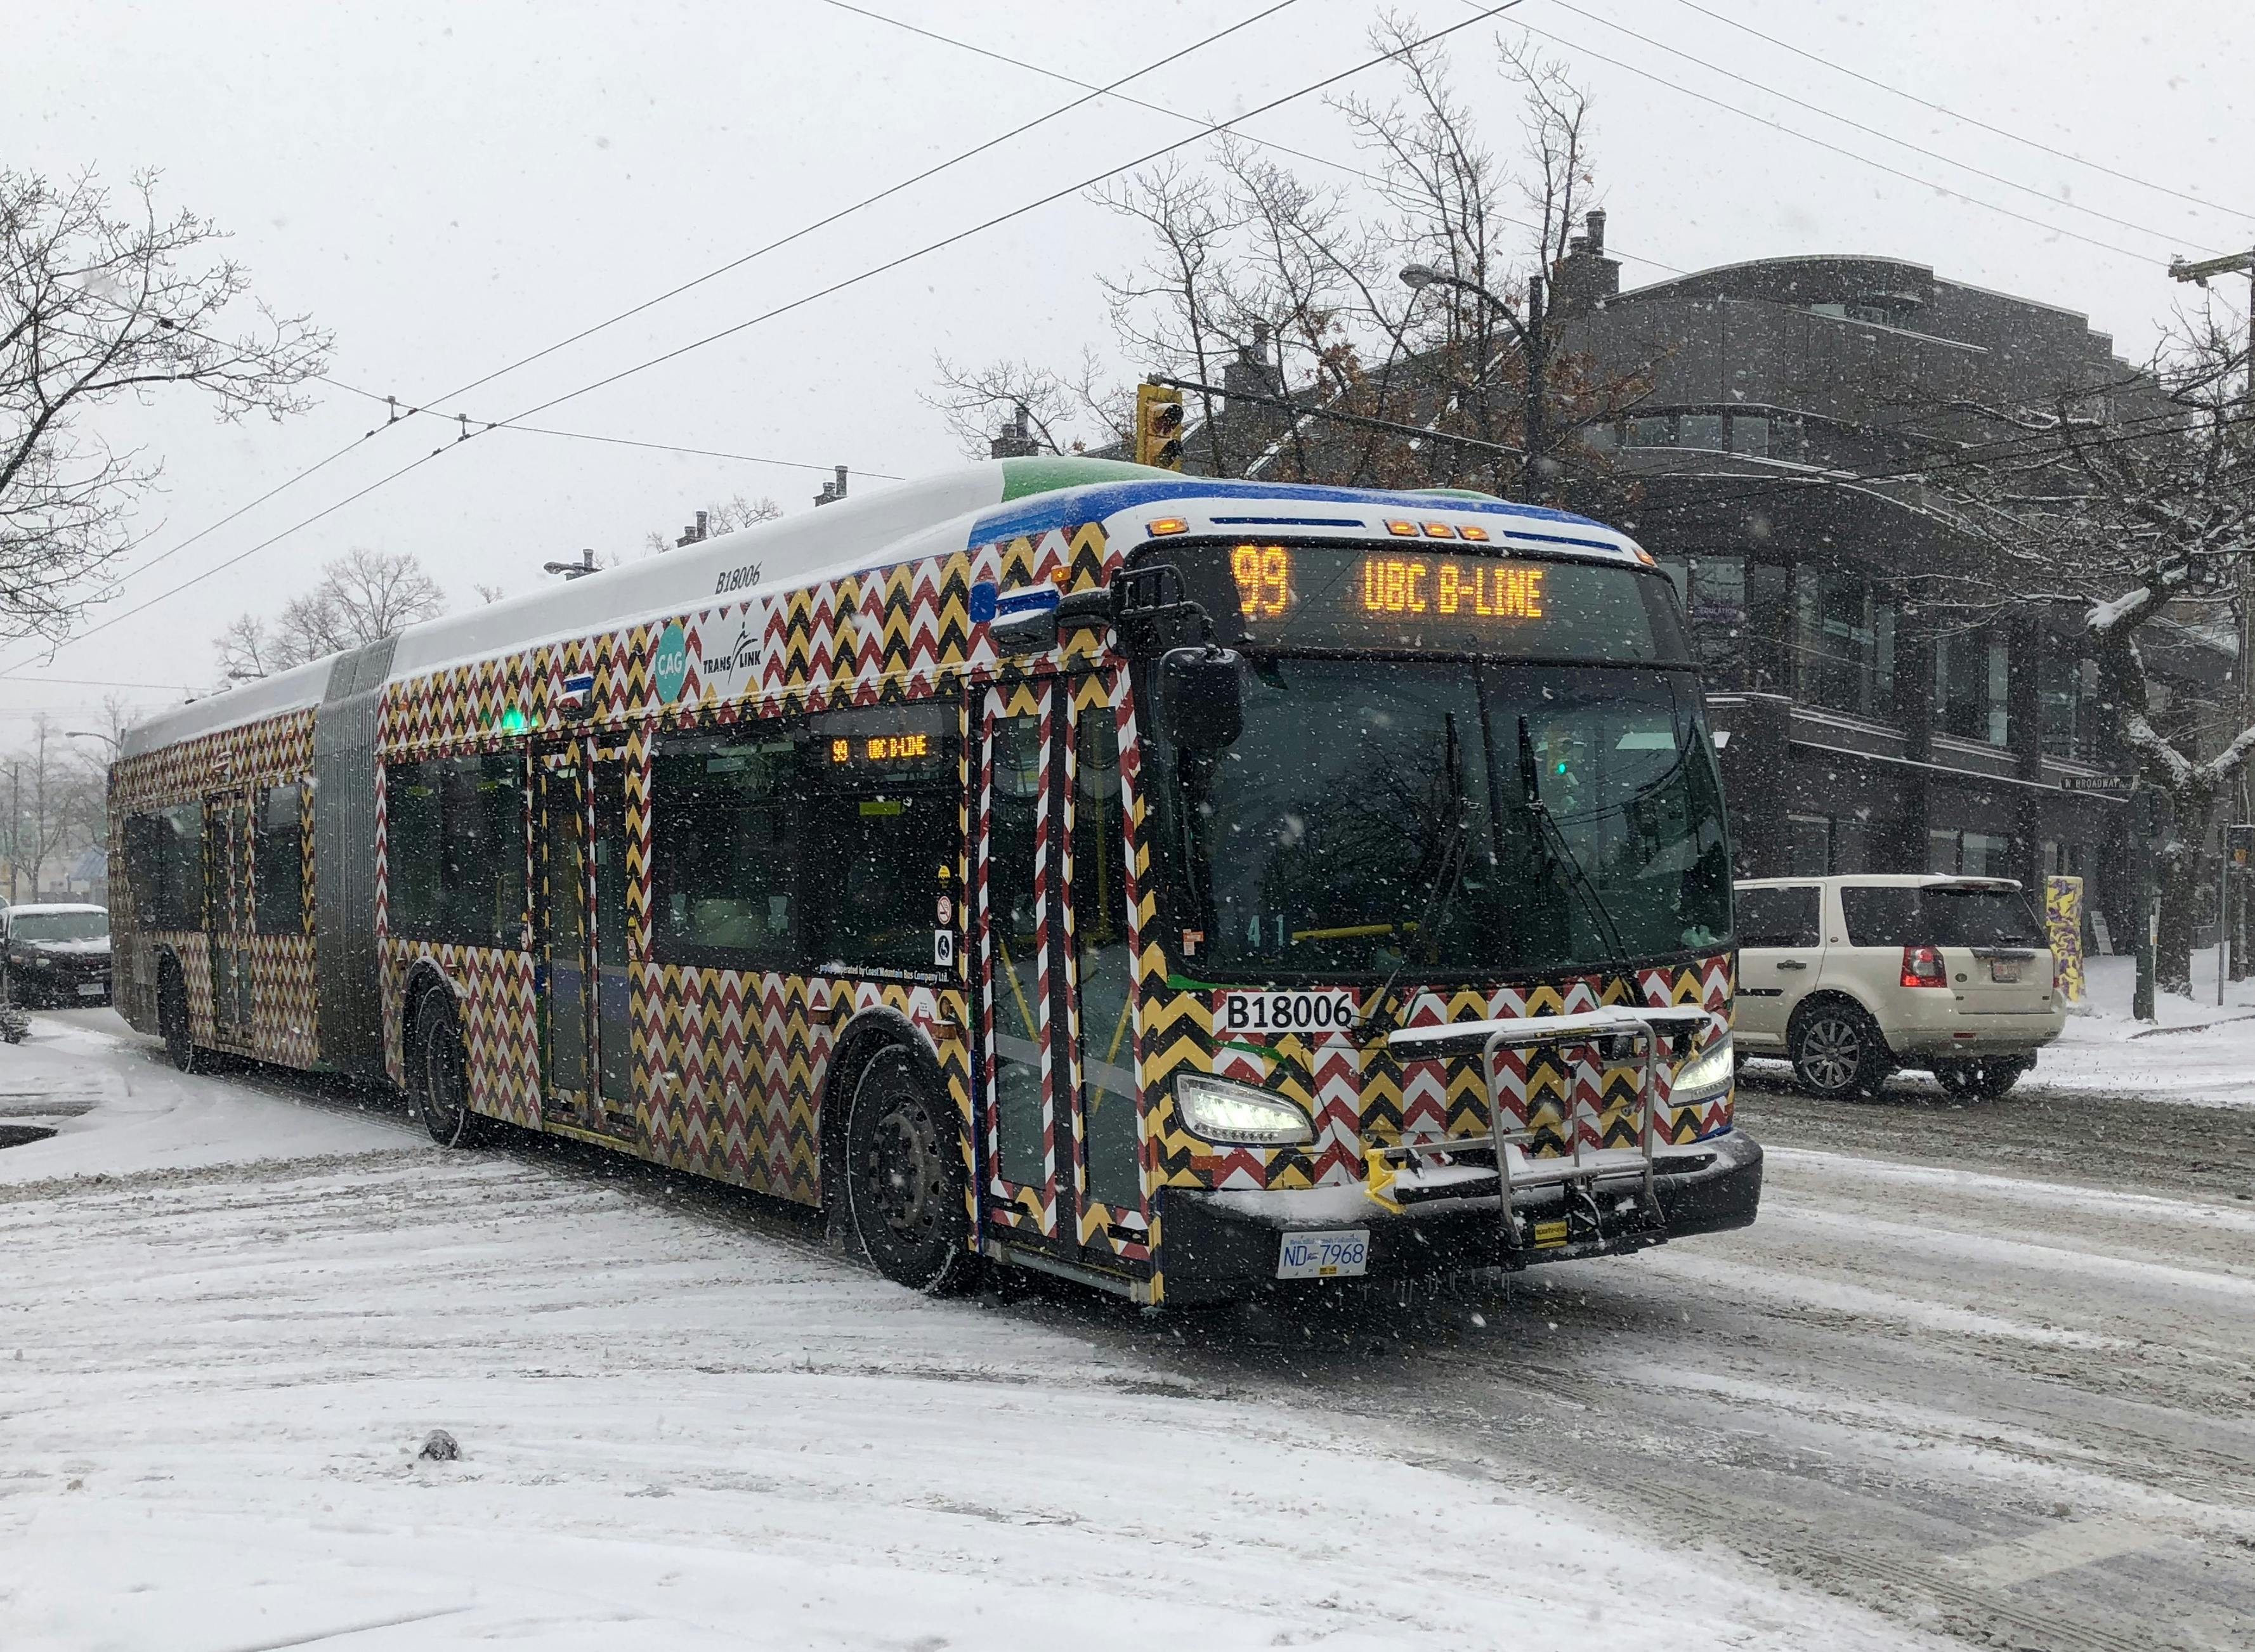 An image of the exterior of a transit bus wrapped in patterned vinyl. The pattern is composed of road work caution tape, with arrow-like shapes alternating from yellow and black to red and white.